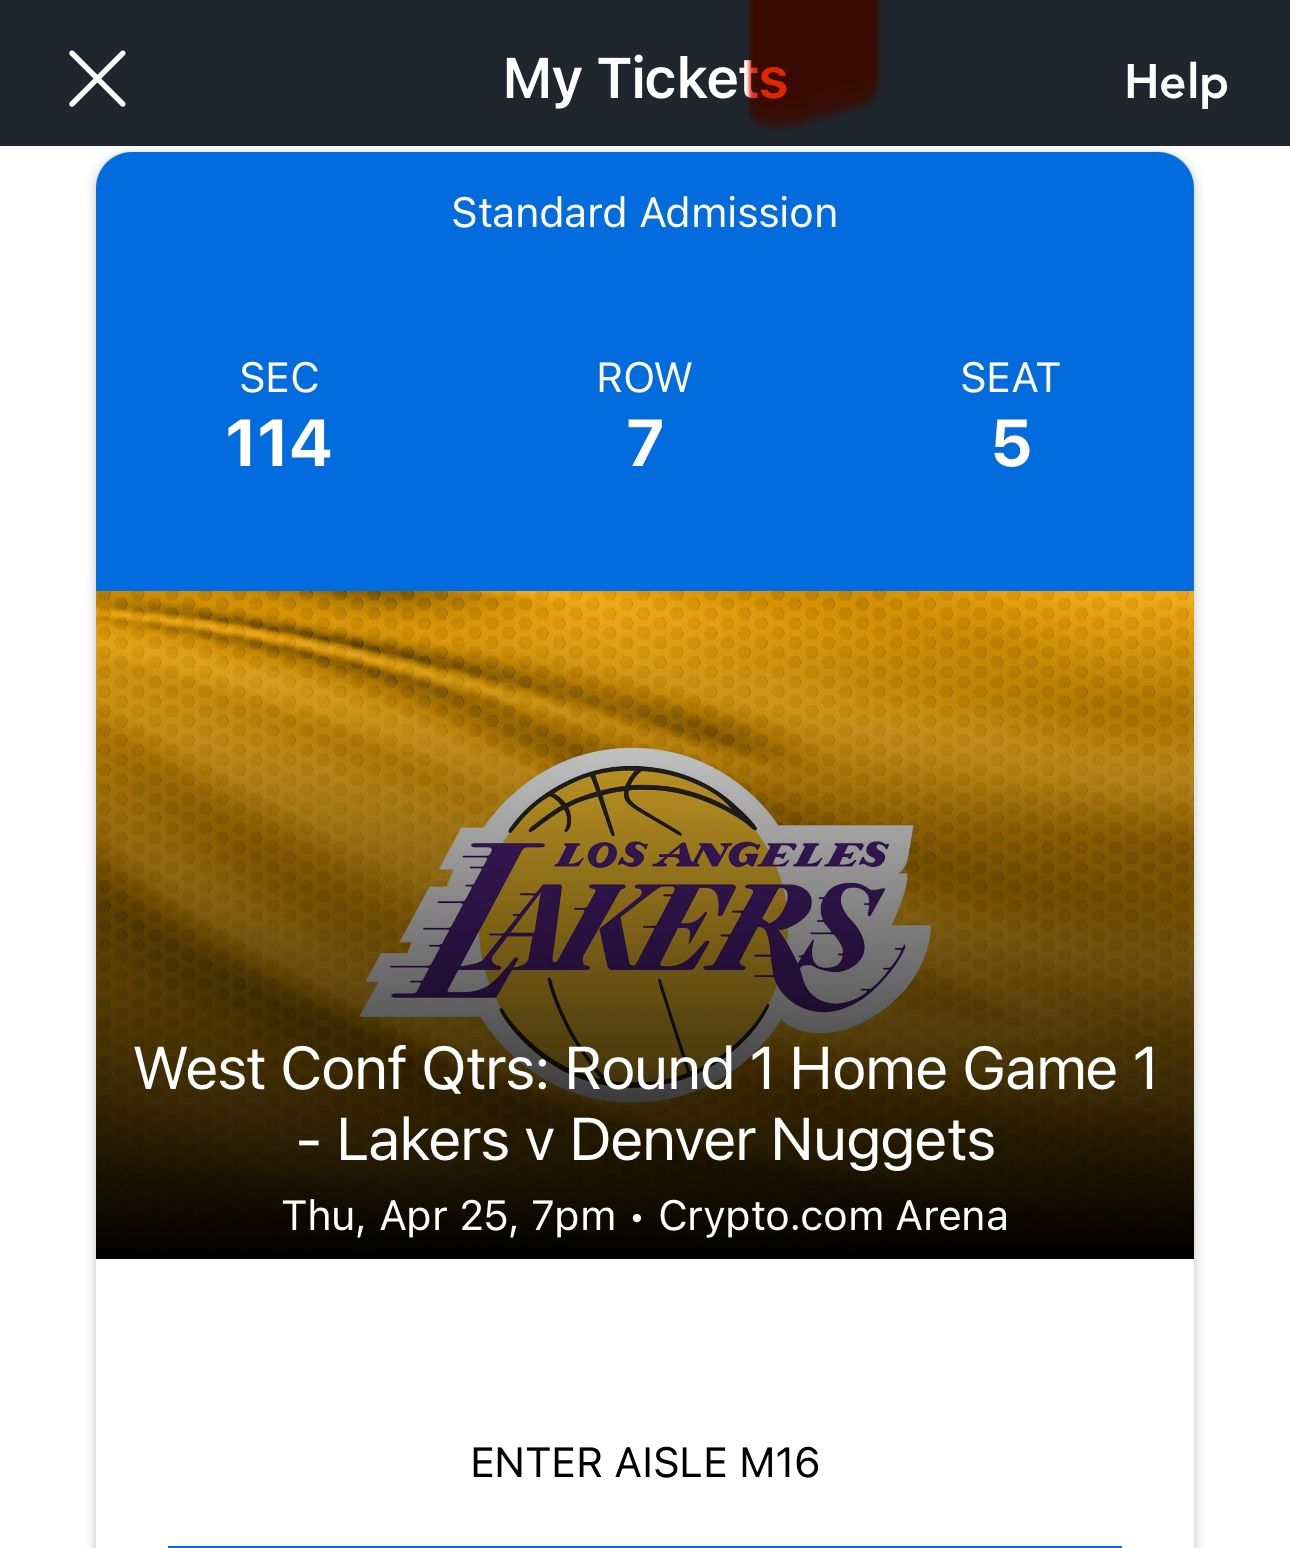 1 Laker ticket For Tomorrow 4/25 7pm Section 114 ROW 7 Seat 5